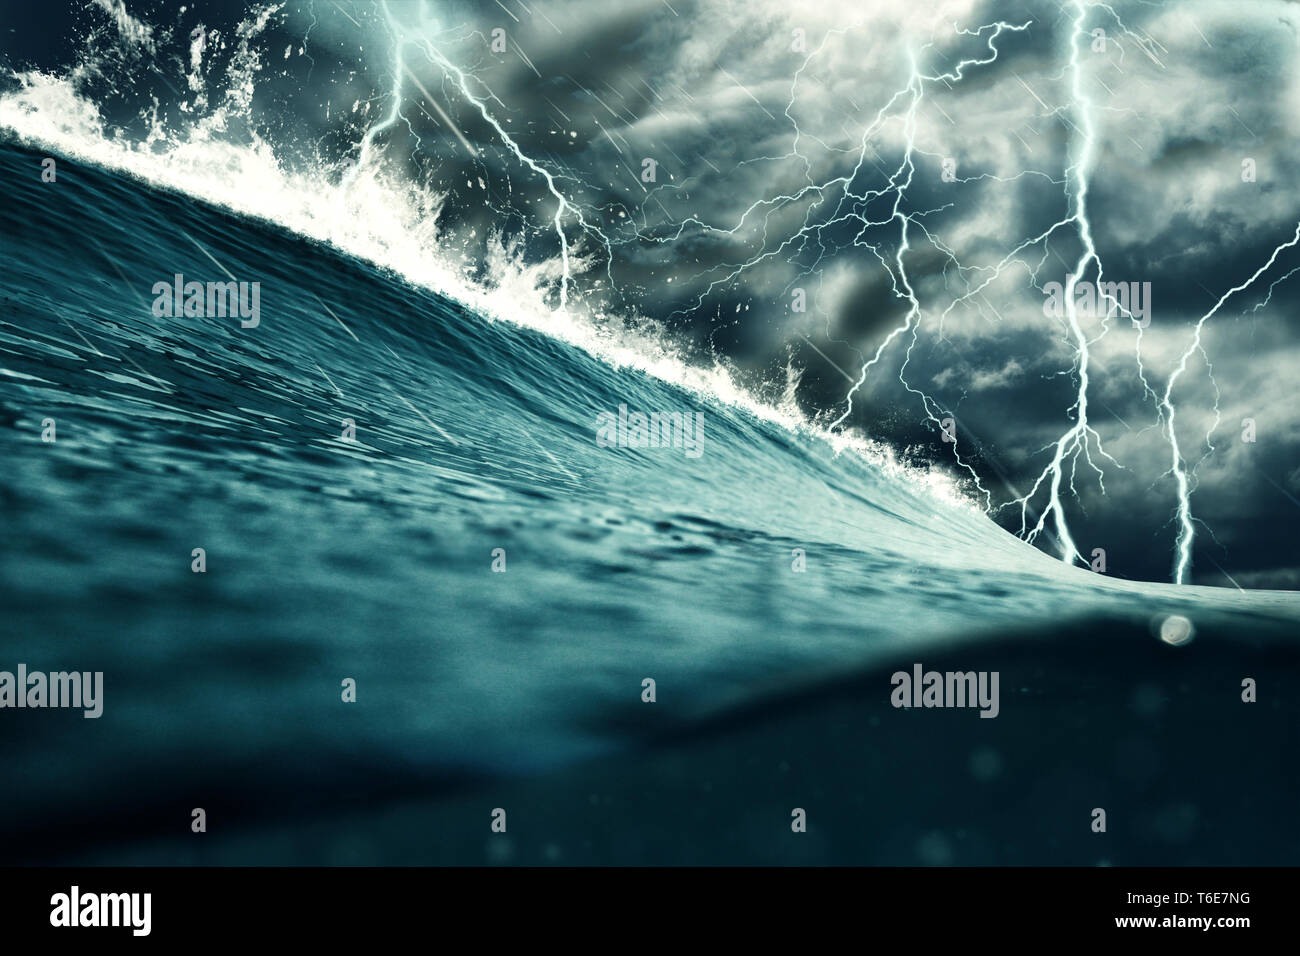 Ocean scene with lightning and stormy weather Stock Photo